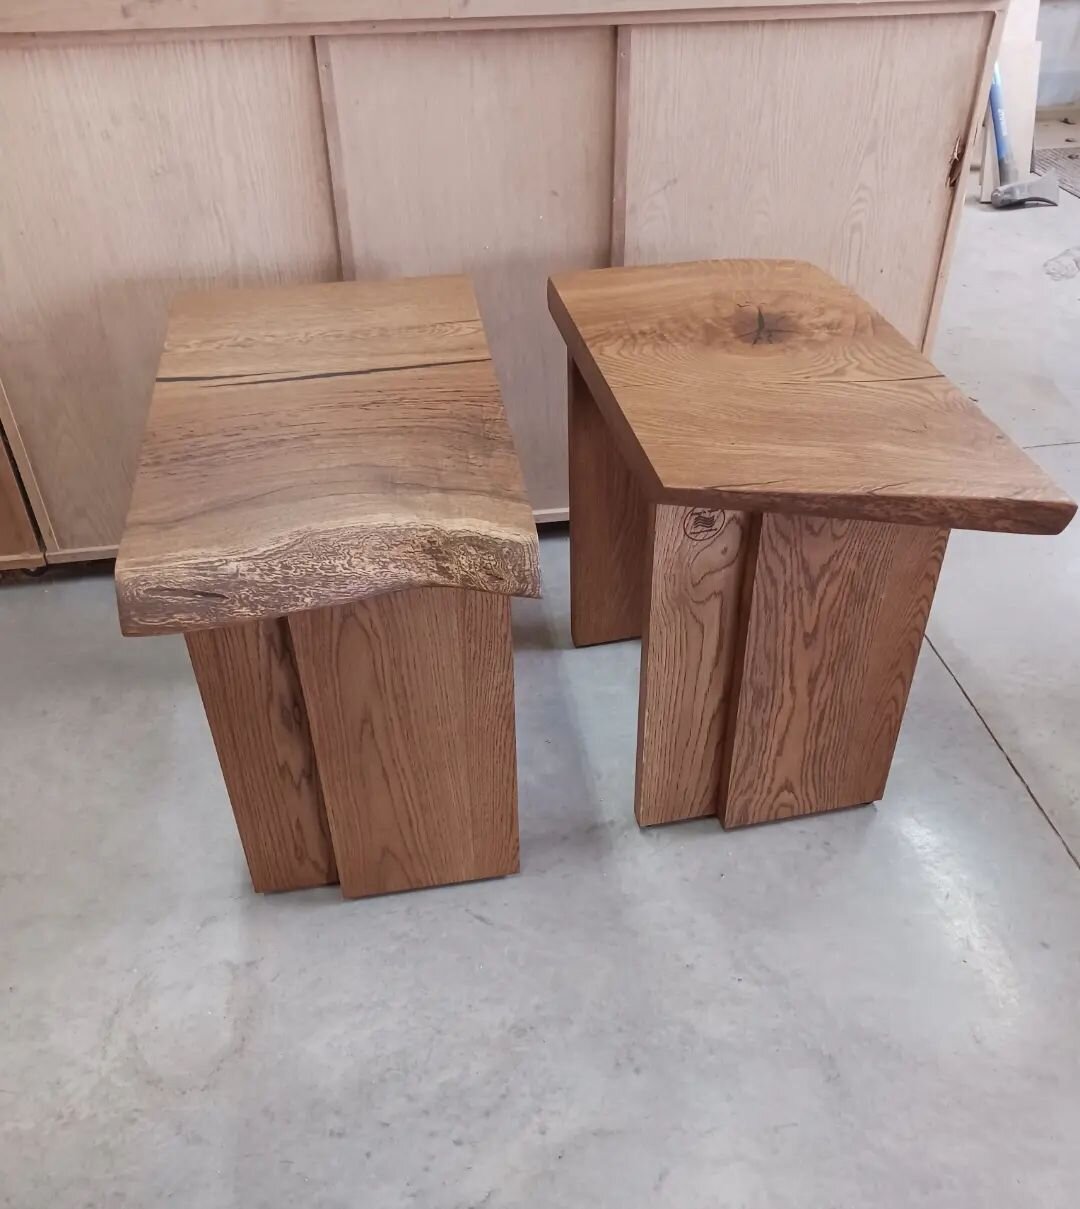 Finished up this cool pair of endtables today. I don't get many orders for wooden bases, so I was excited to do this one. 

White oak finished with @odiesoil coffee 

Text me for custom orders or fill out a Project Inquiry on our website 😄

Ridge &a